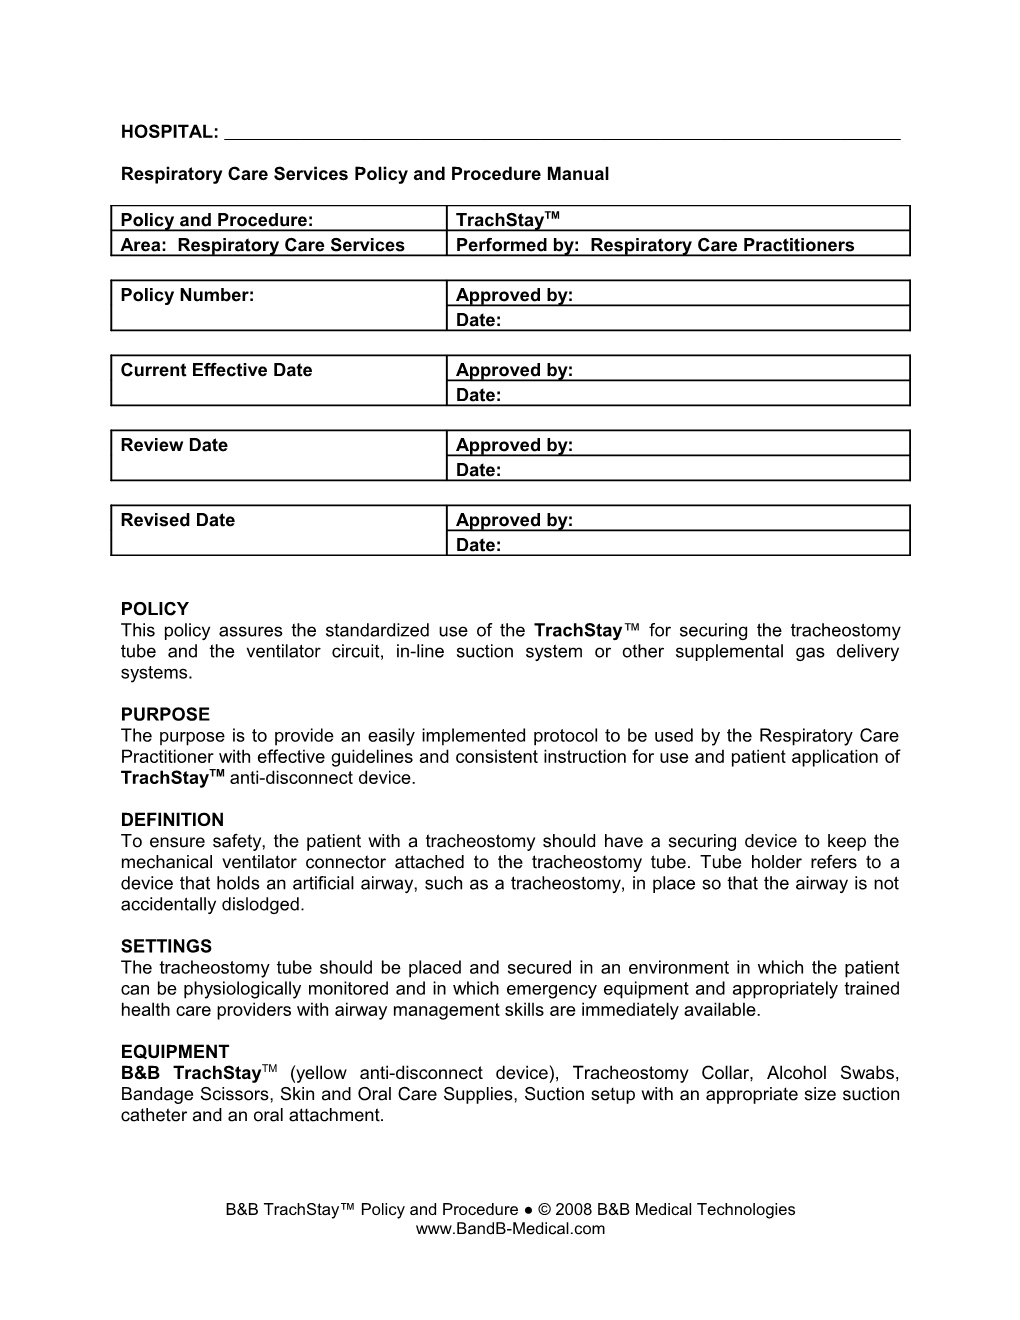 Respiratory Care Services Policy and Procedure Manual